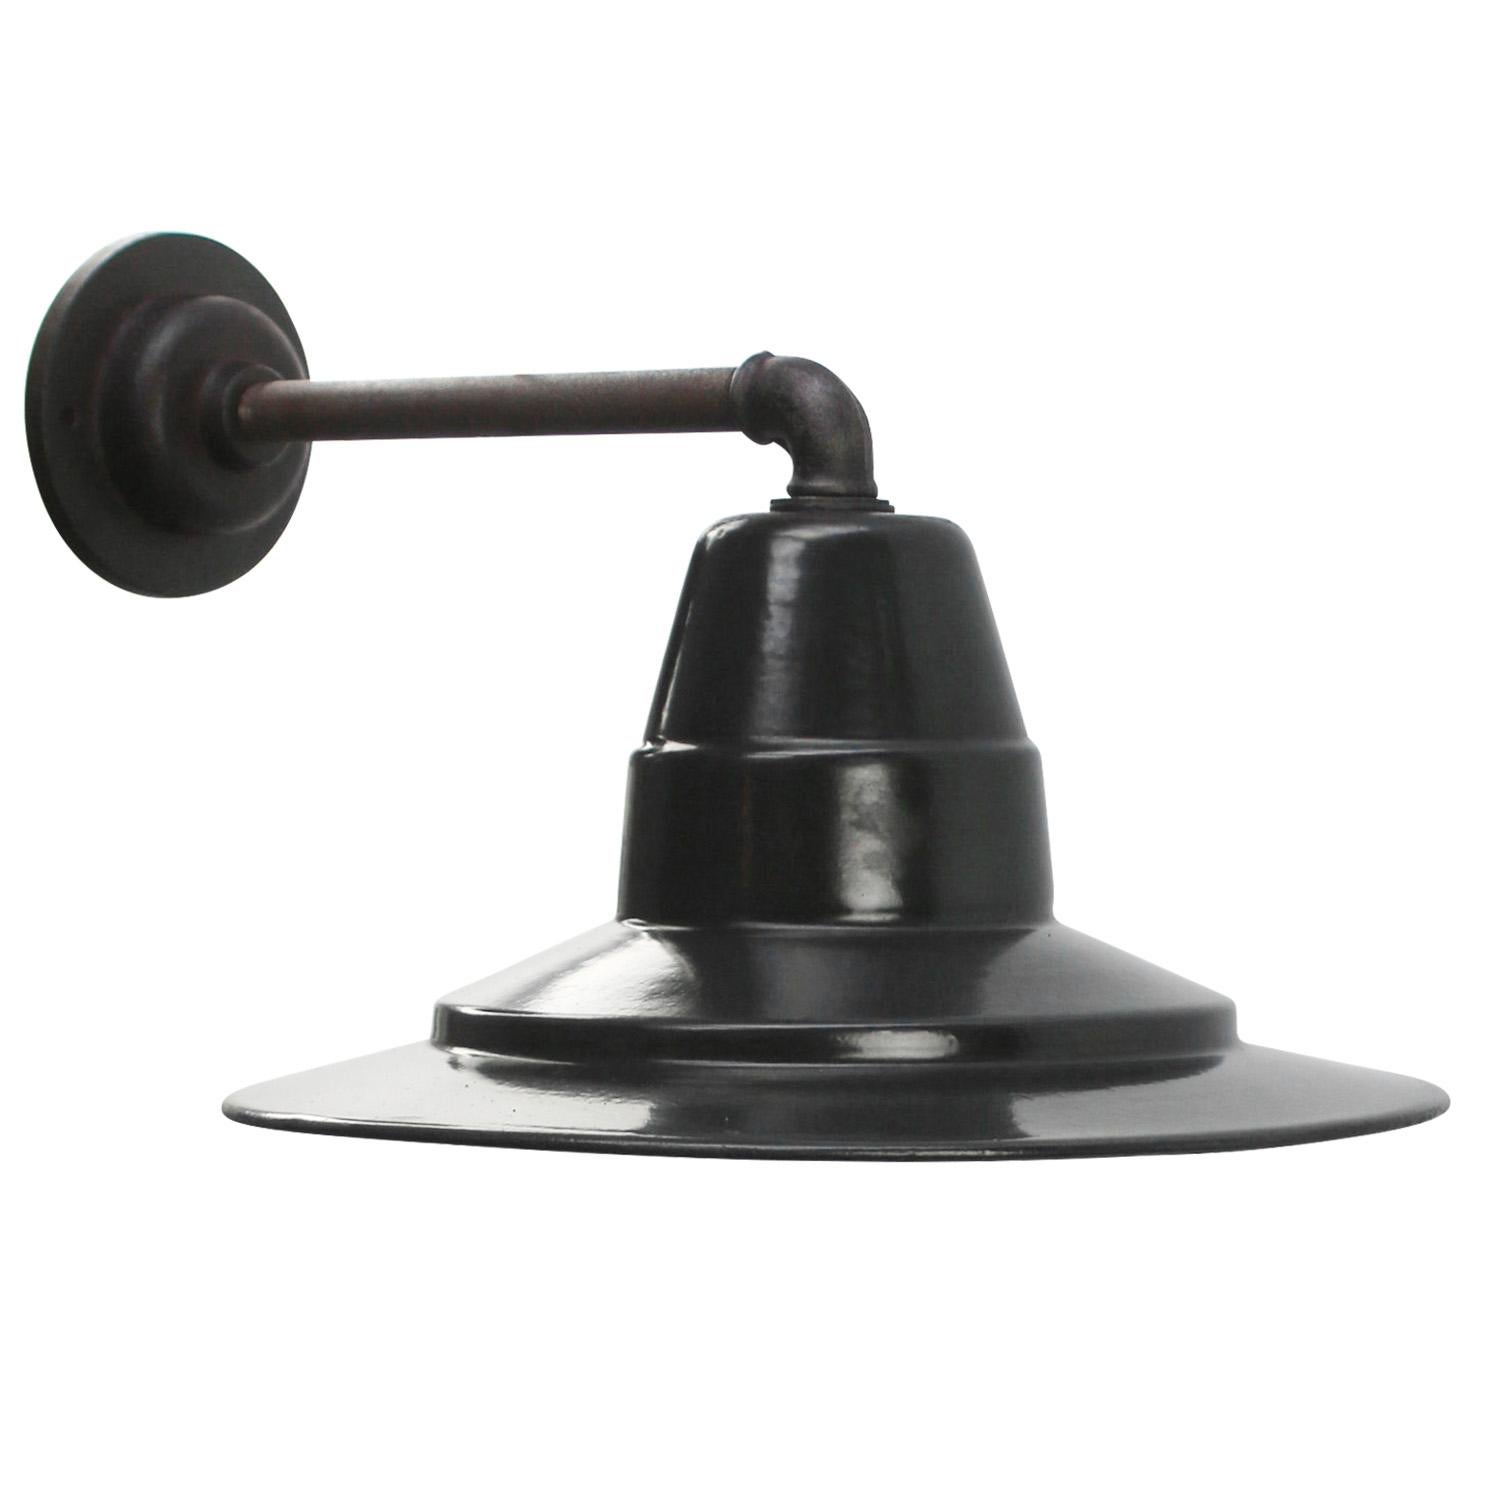 Factory wall light.
Anthracite enamel, white interior

diameter cast iron wall piece: 10.5 cm / 4 inches, 2 holes to secure

Weight: 2.90 kg / 6.4 lb

Priced per individual item. All lamps have been made suitable by international standards for